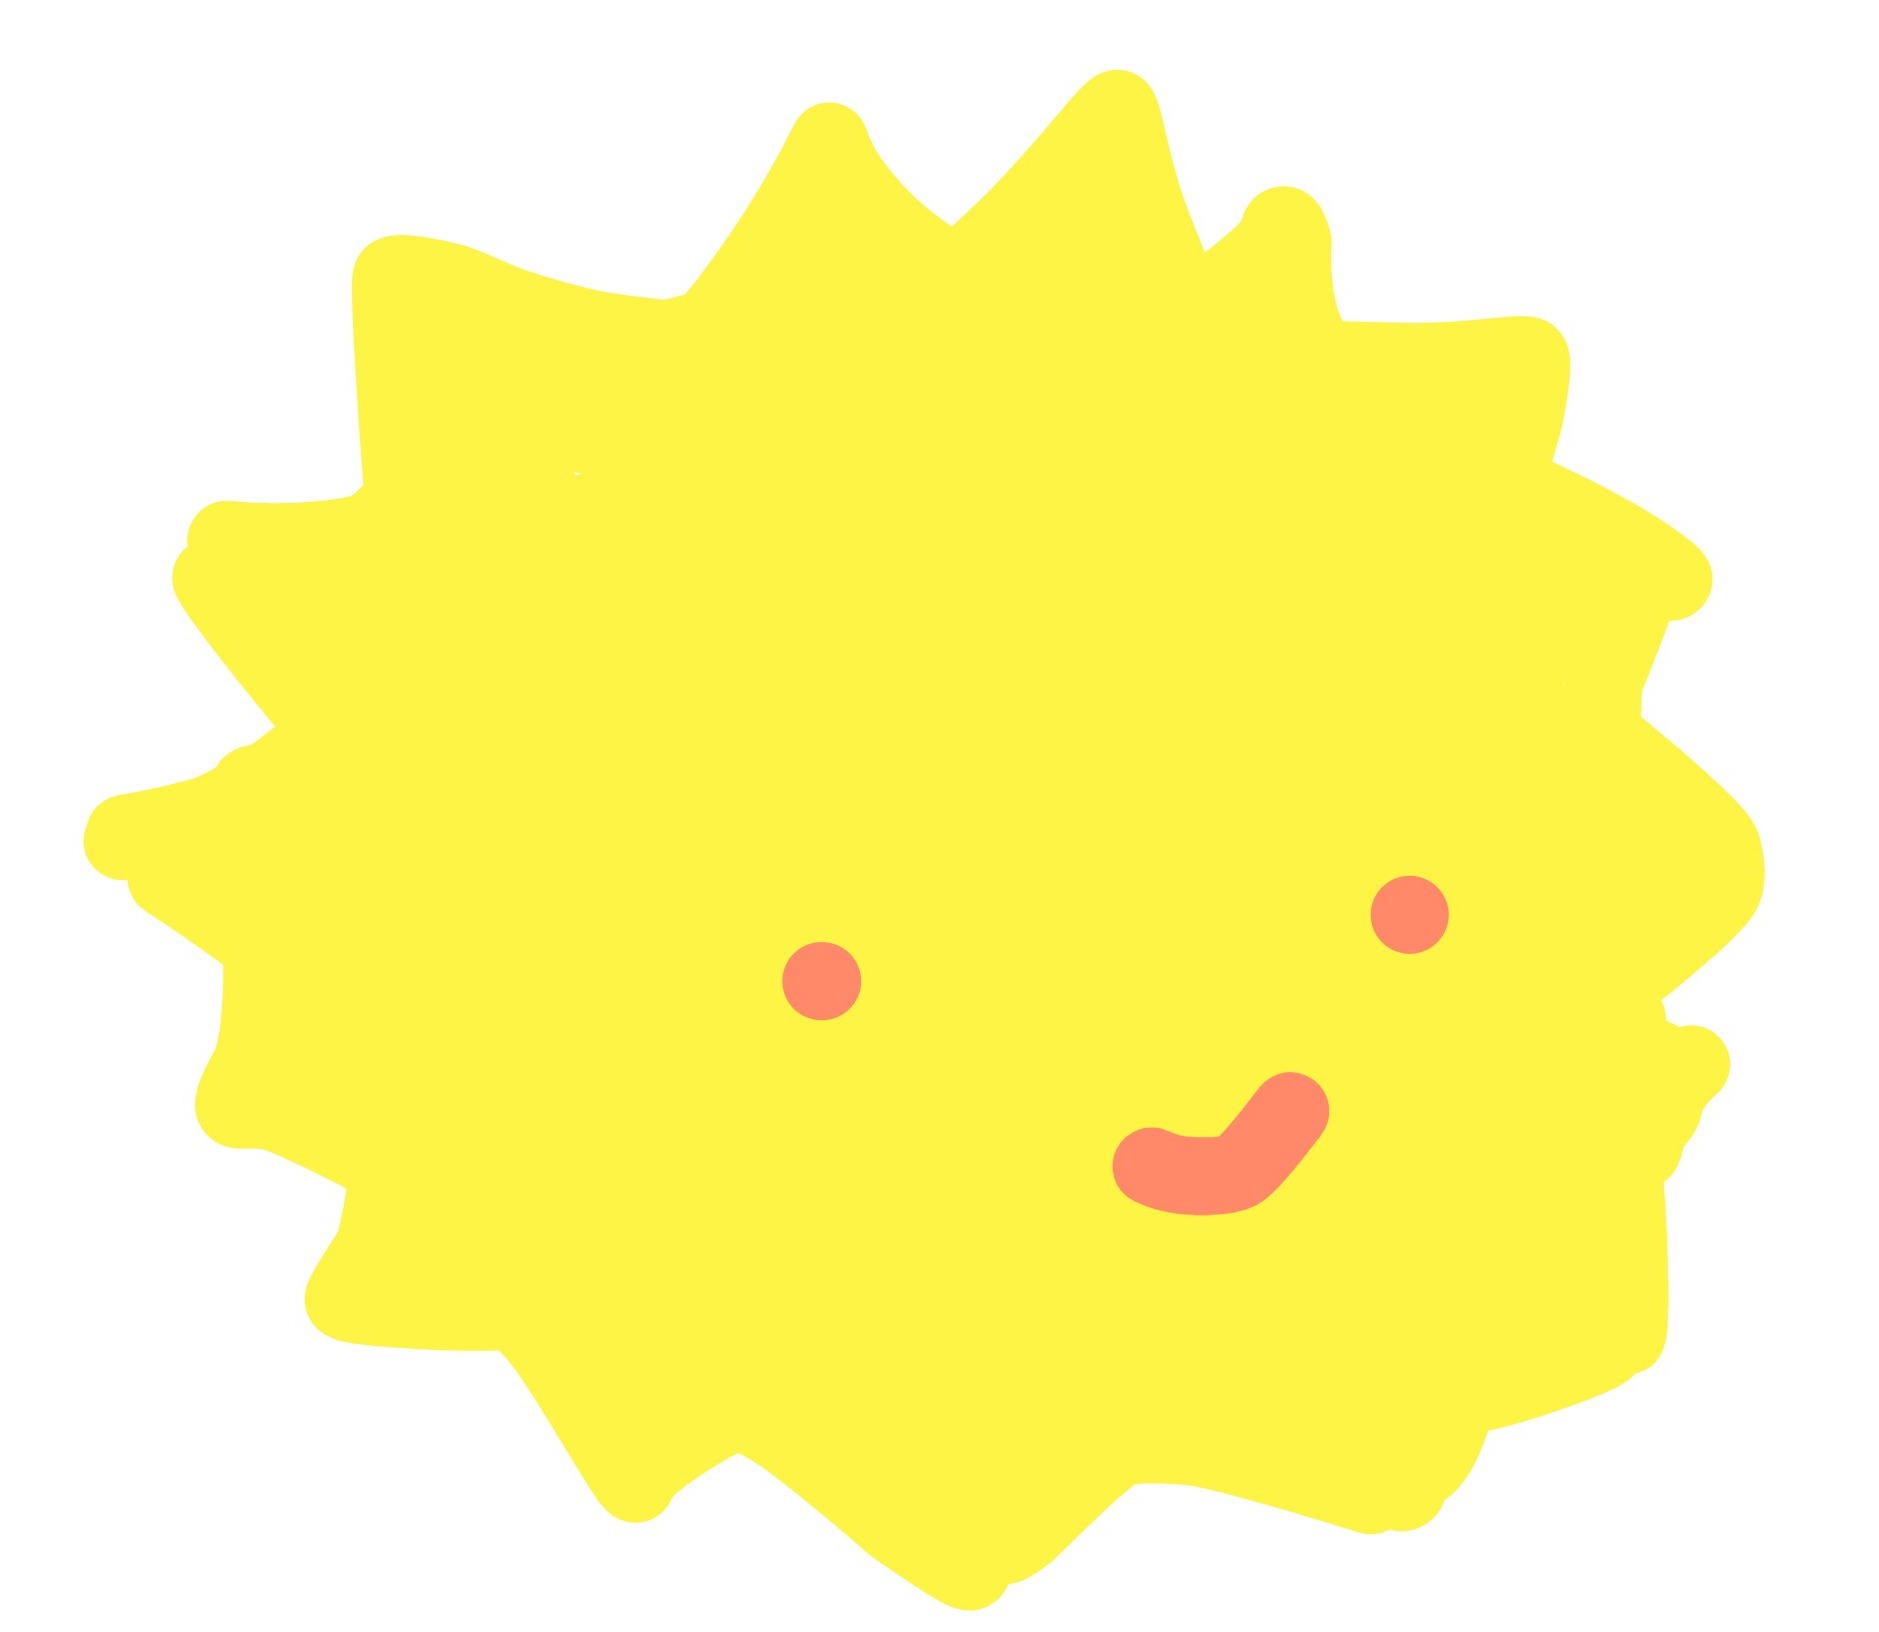 simple drawing of a yellow sun with a smiley face in pink